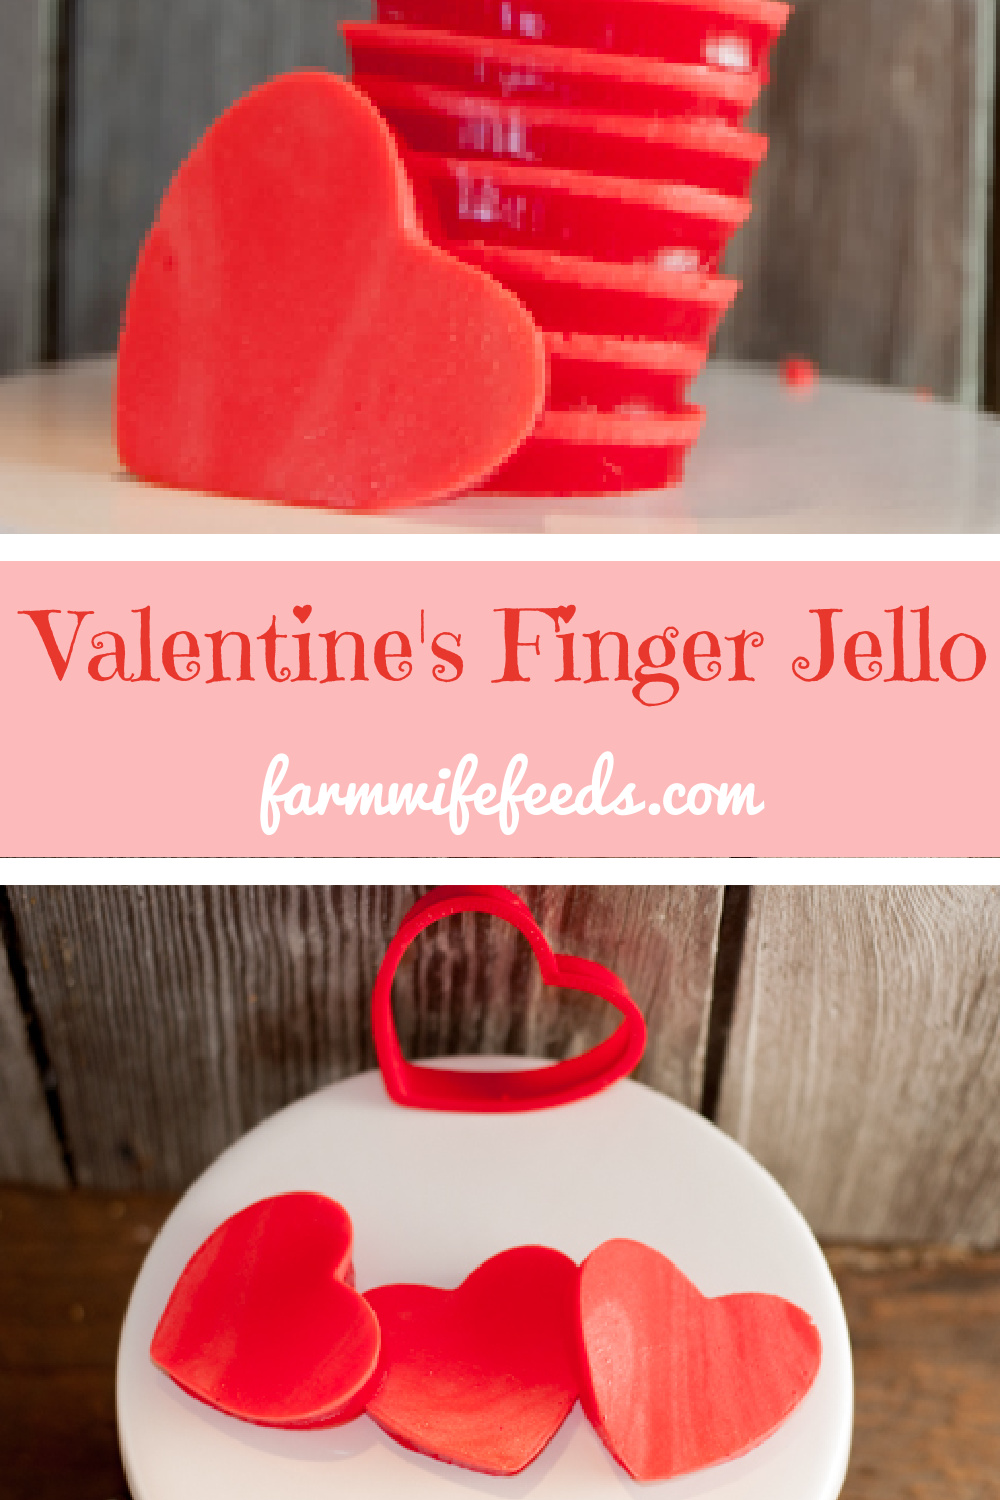 Valentine's Finger Jello from Farmwife Feeds. A fun easy snack to make with kids. #jello #fingerfood #valentine #valentines #heart